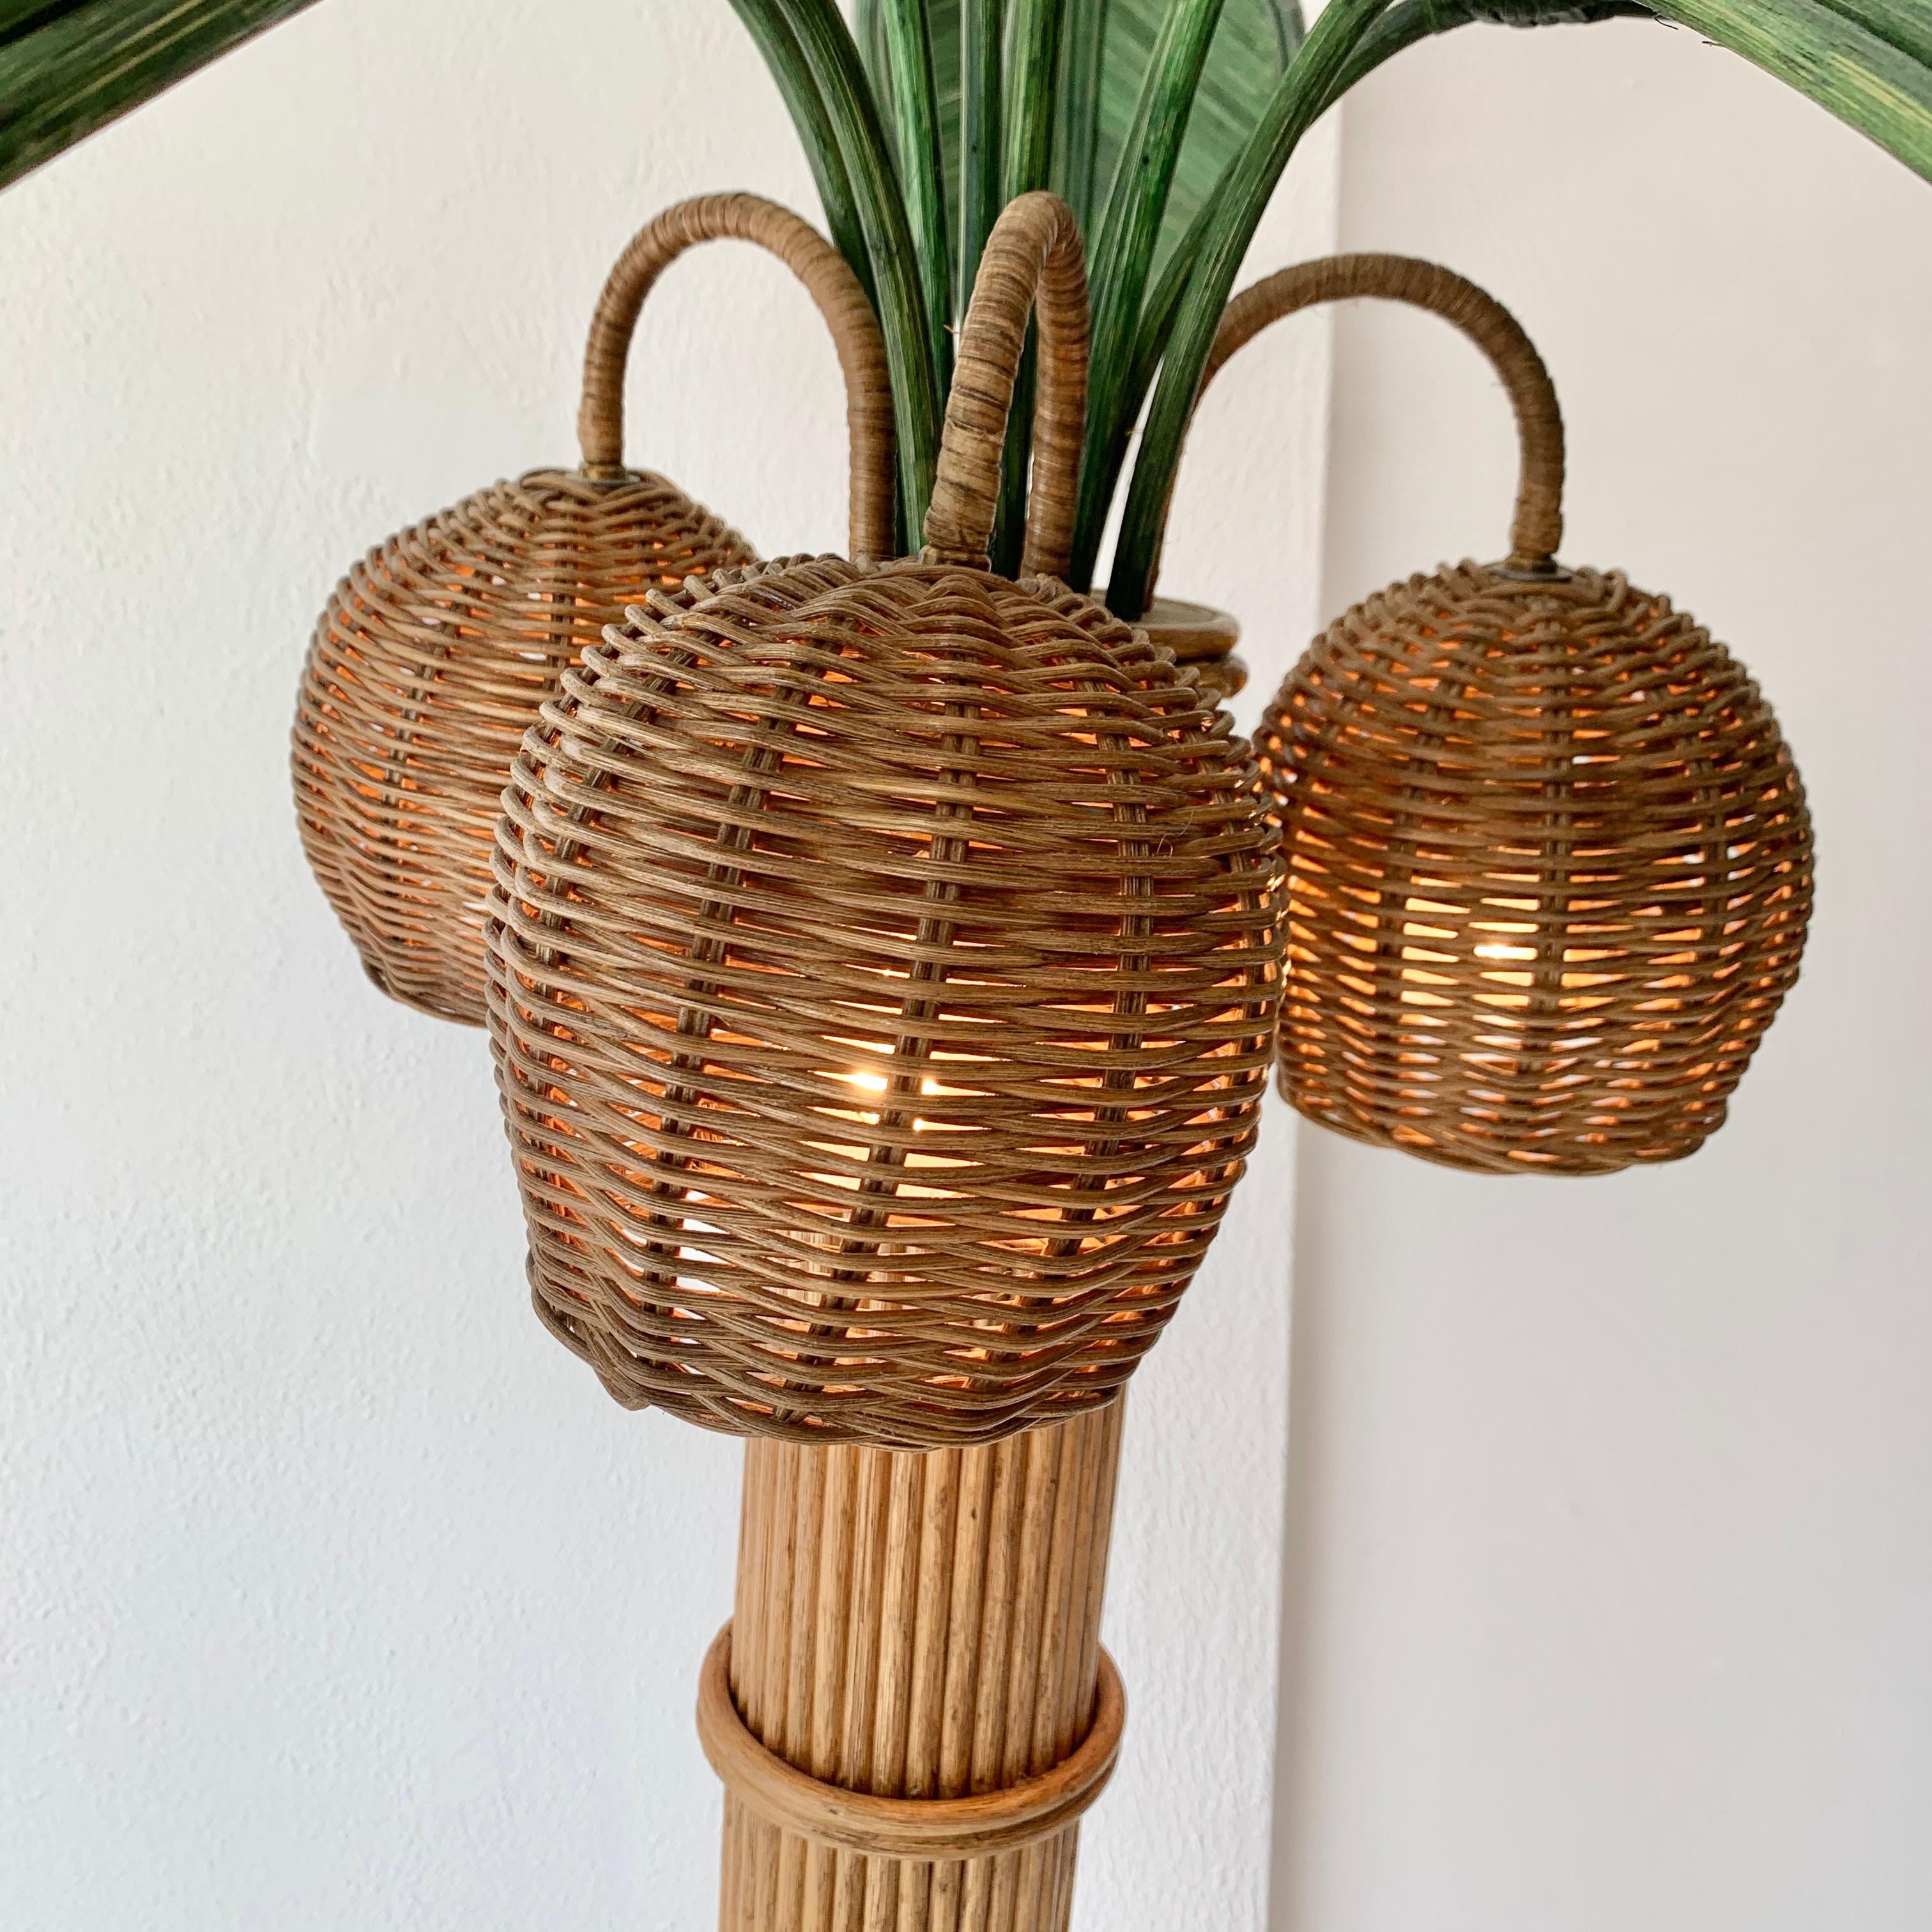 Rattan and Wicker Palm Tree Floor Lamps 2